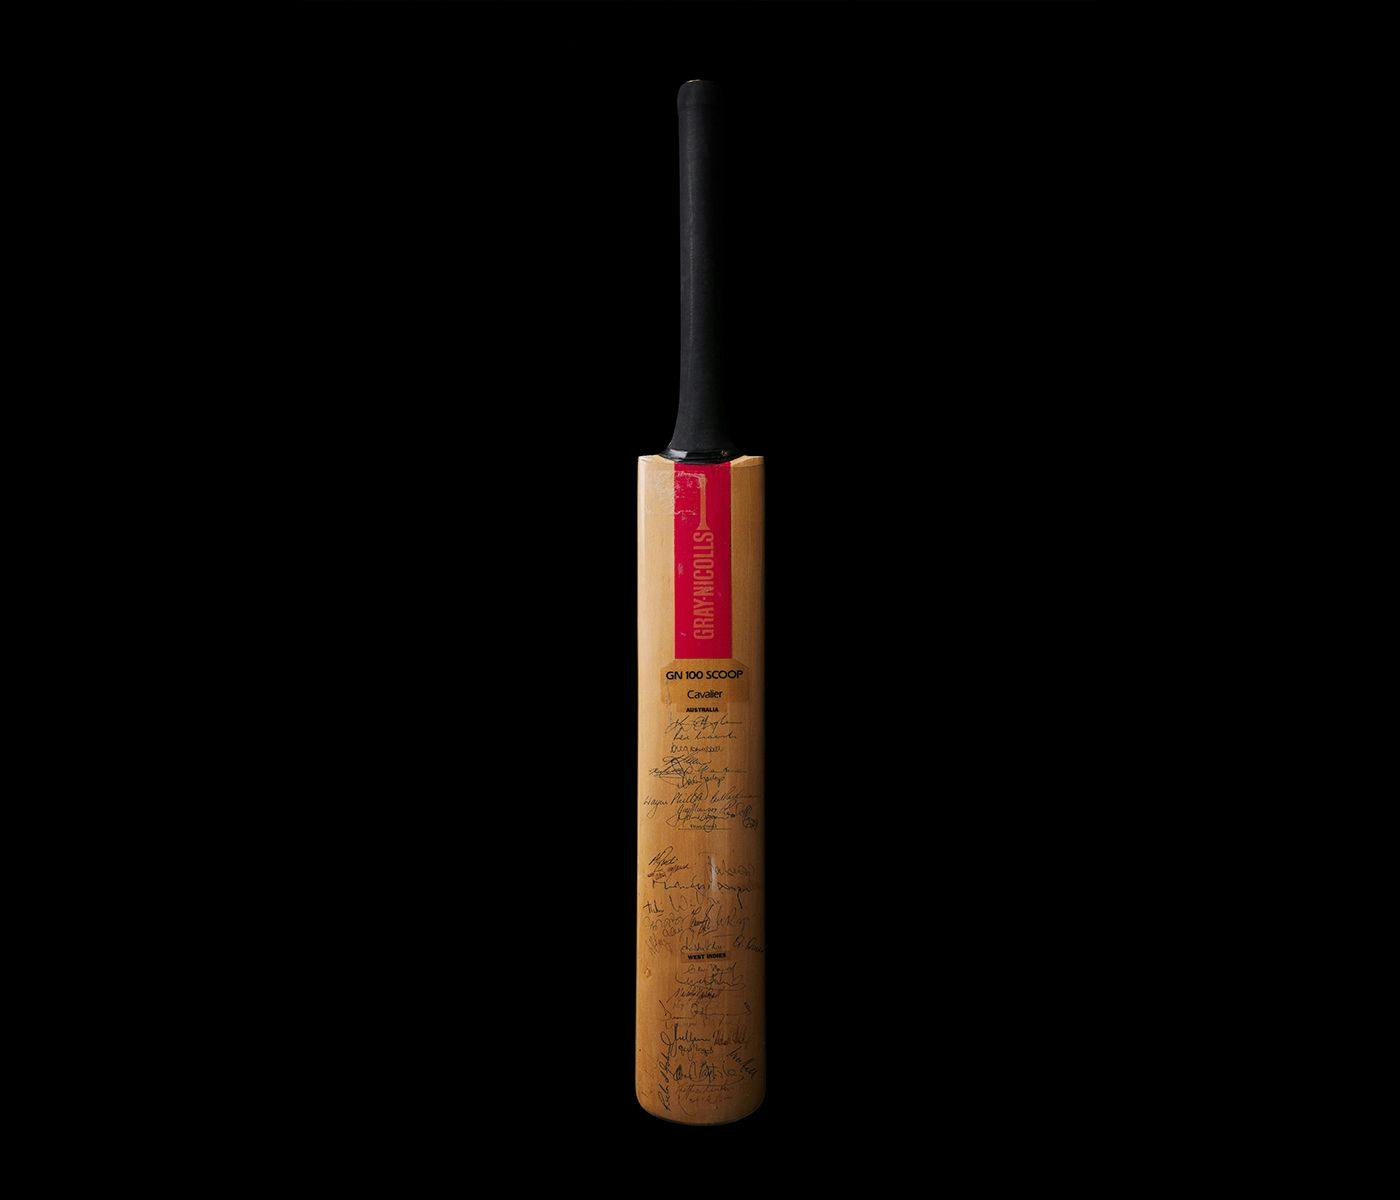 A cricket bat, signed by various famous cricket players.